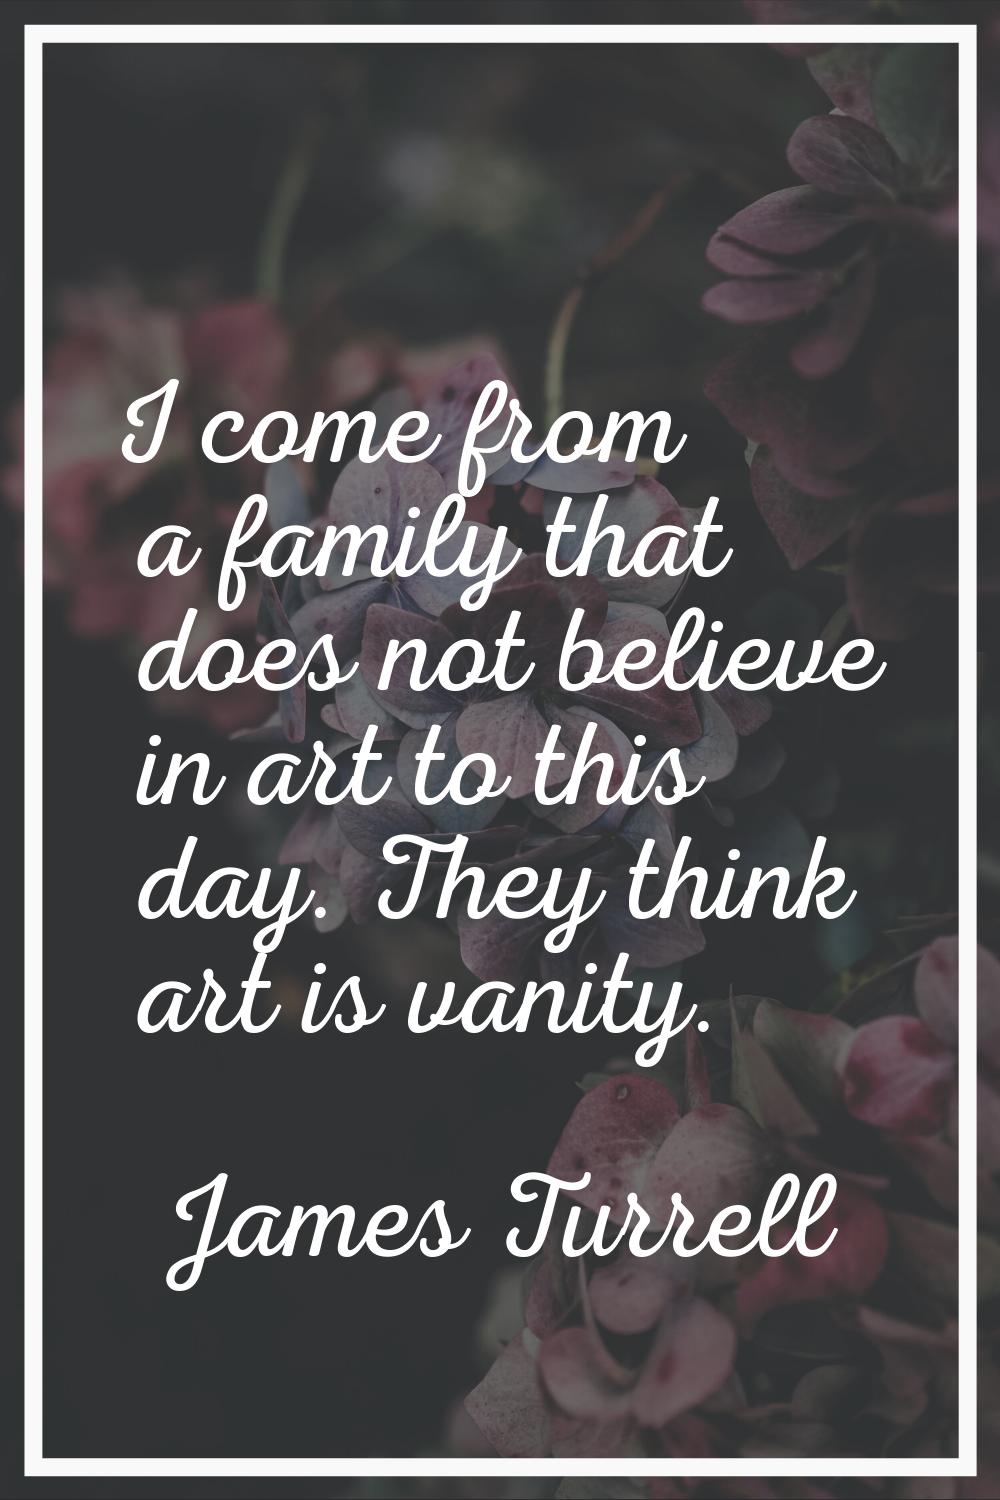 I come from a family that does not believe in art to this day. They think art is vanity.